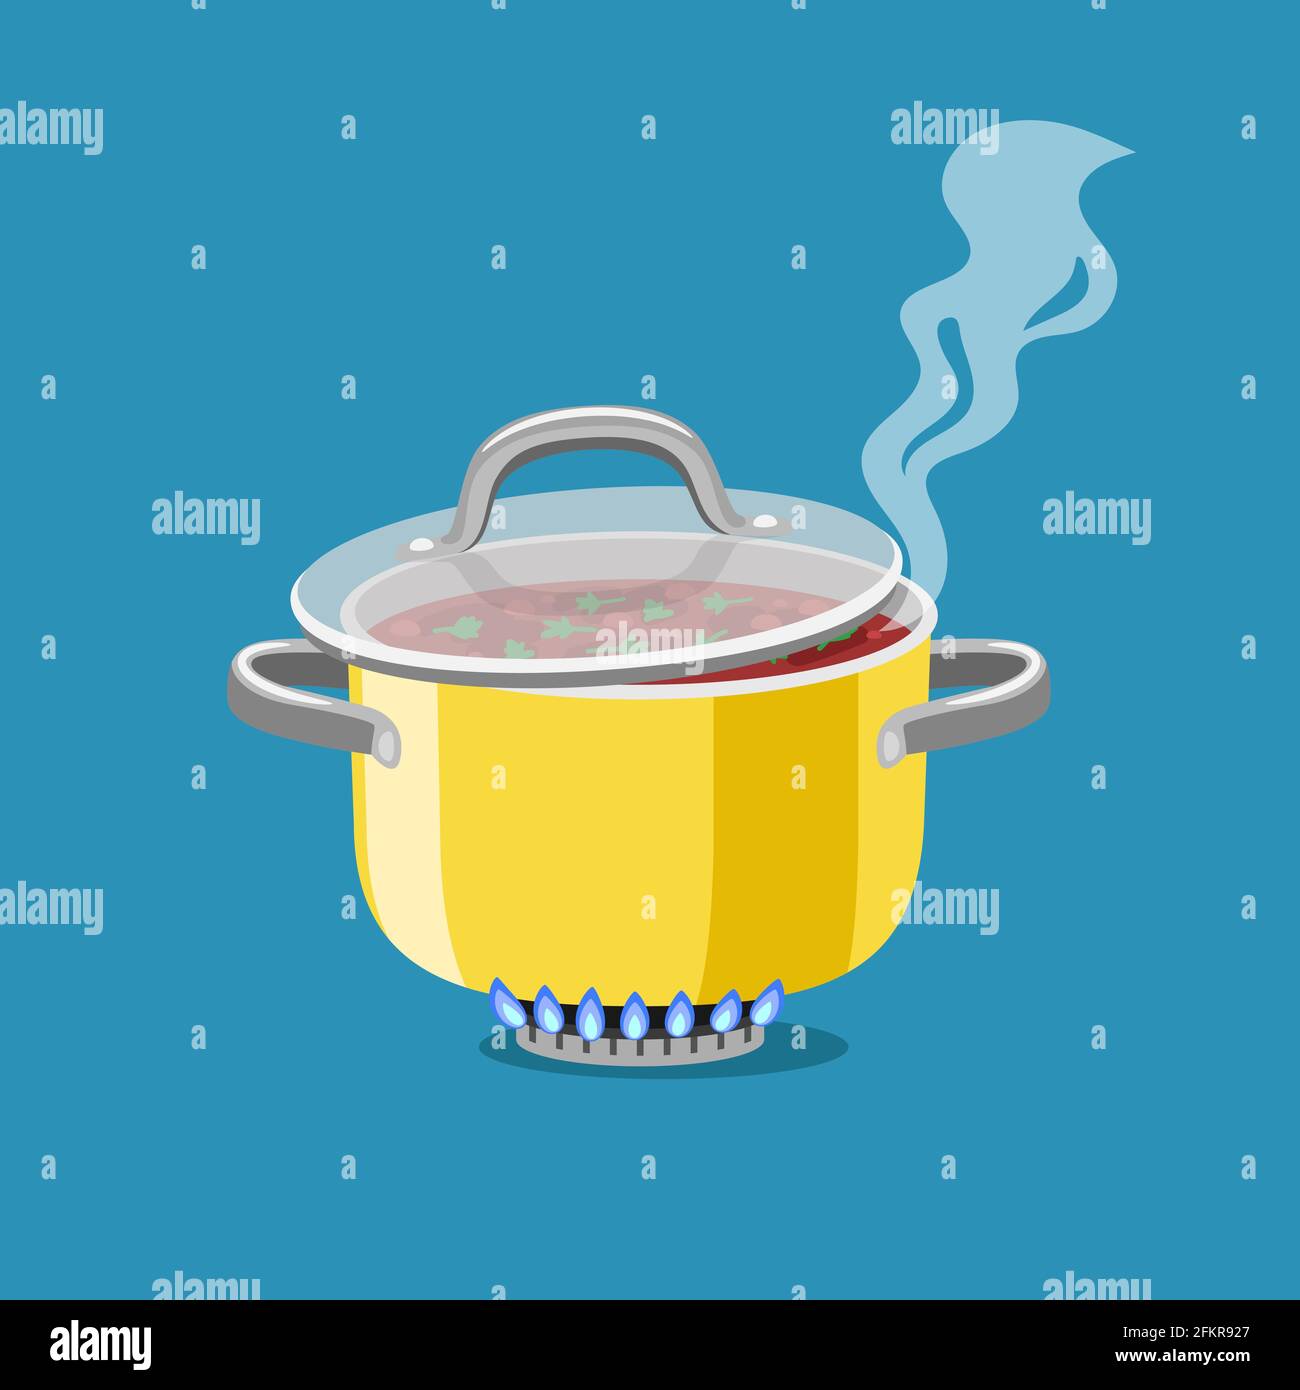 https://c8.alamy.com/comp/2FKR927/saucepan-on-burner-cartoon-steel-cooking-pot-with-boiling-soup-flaming-gas-burner-heats-kitchen-cookware-pan-vector-illustration-concept-of-home-dinner-isolated-on-blue-backgroun-2FKR927.jpg